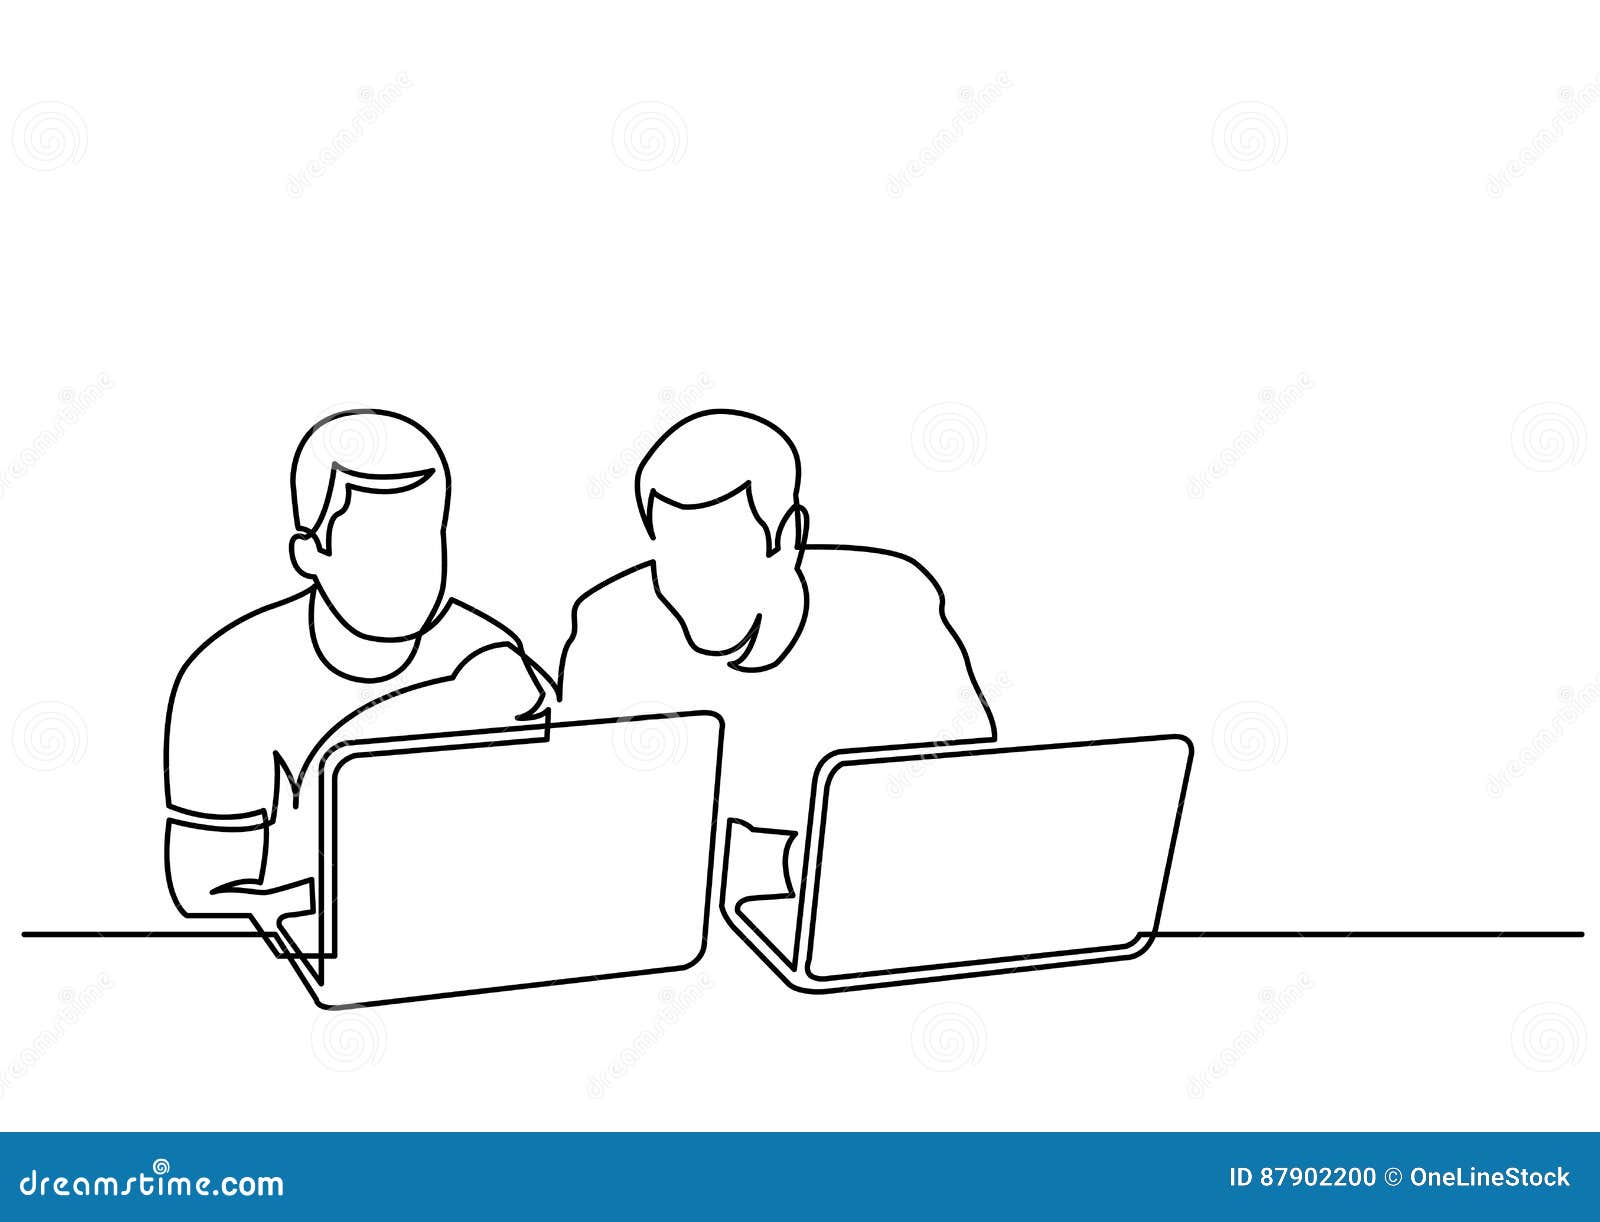 Continuous Line Drawing Of Two Men Sitting And Talking Stock Vector